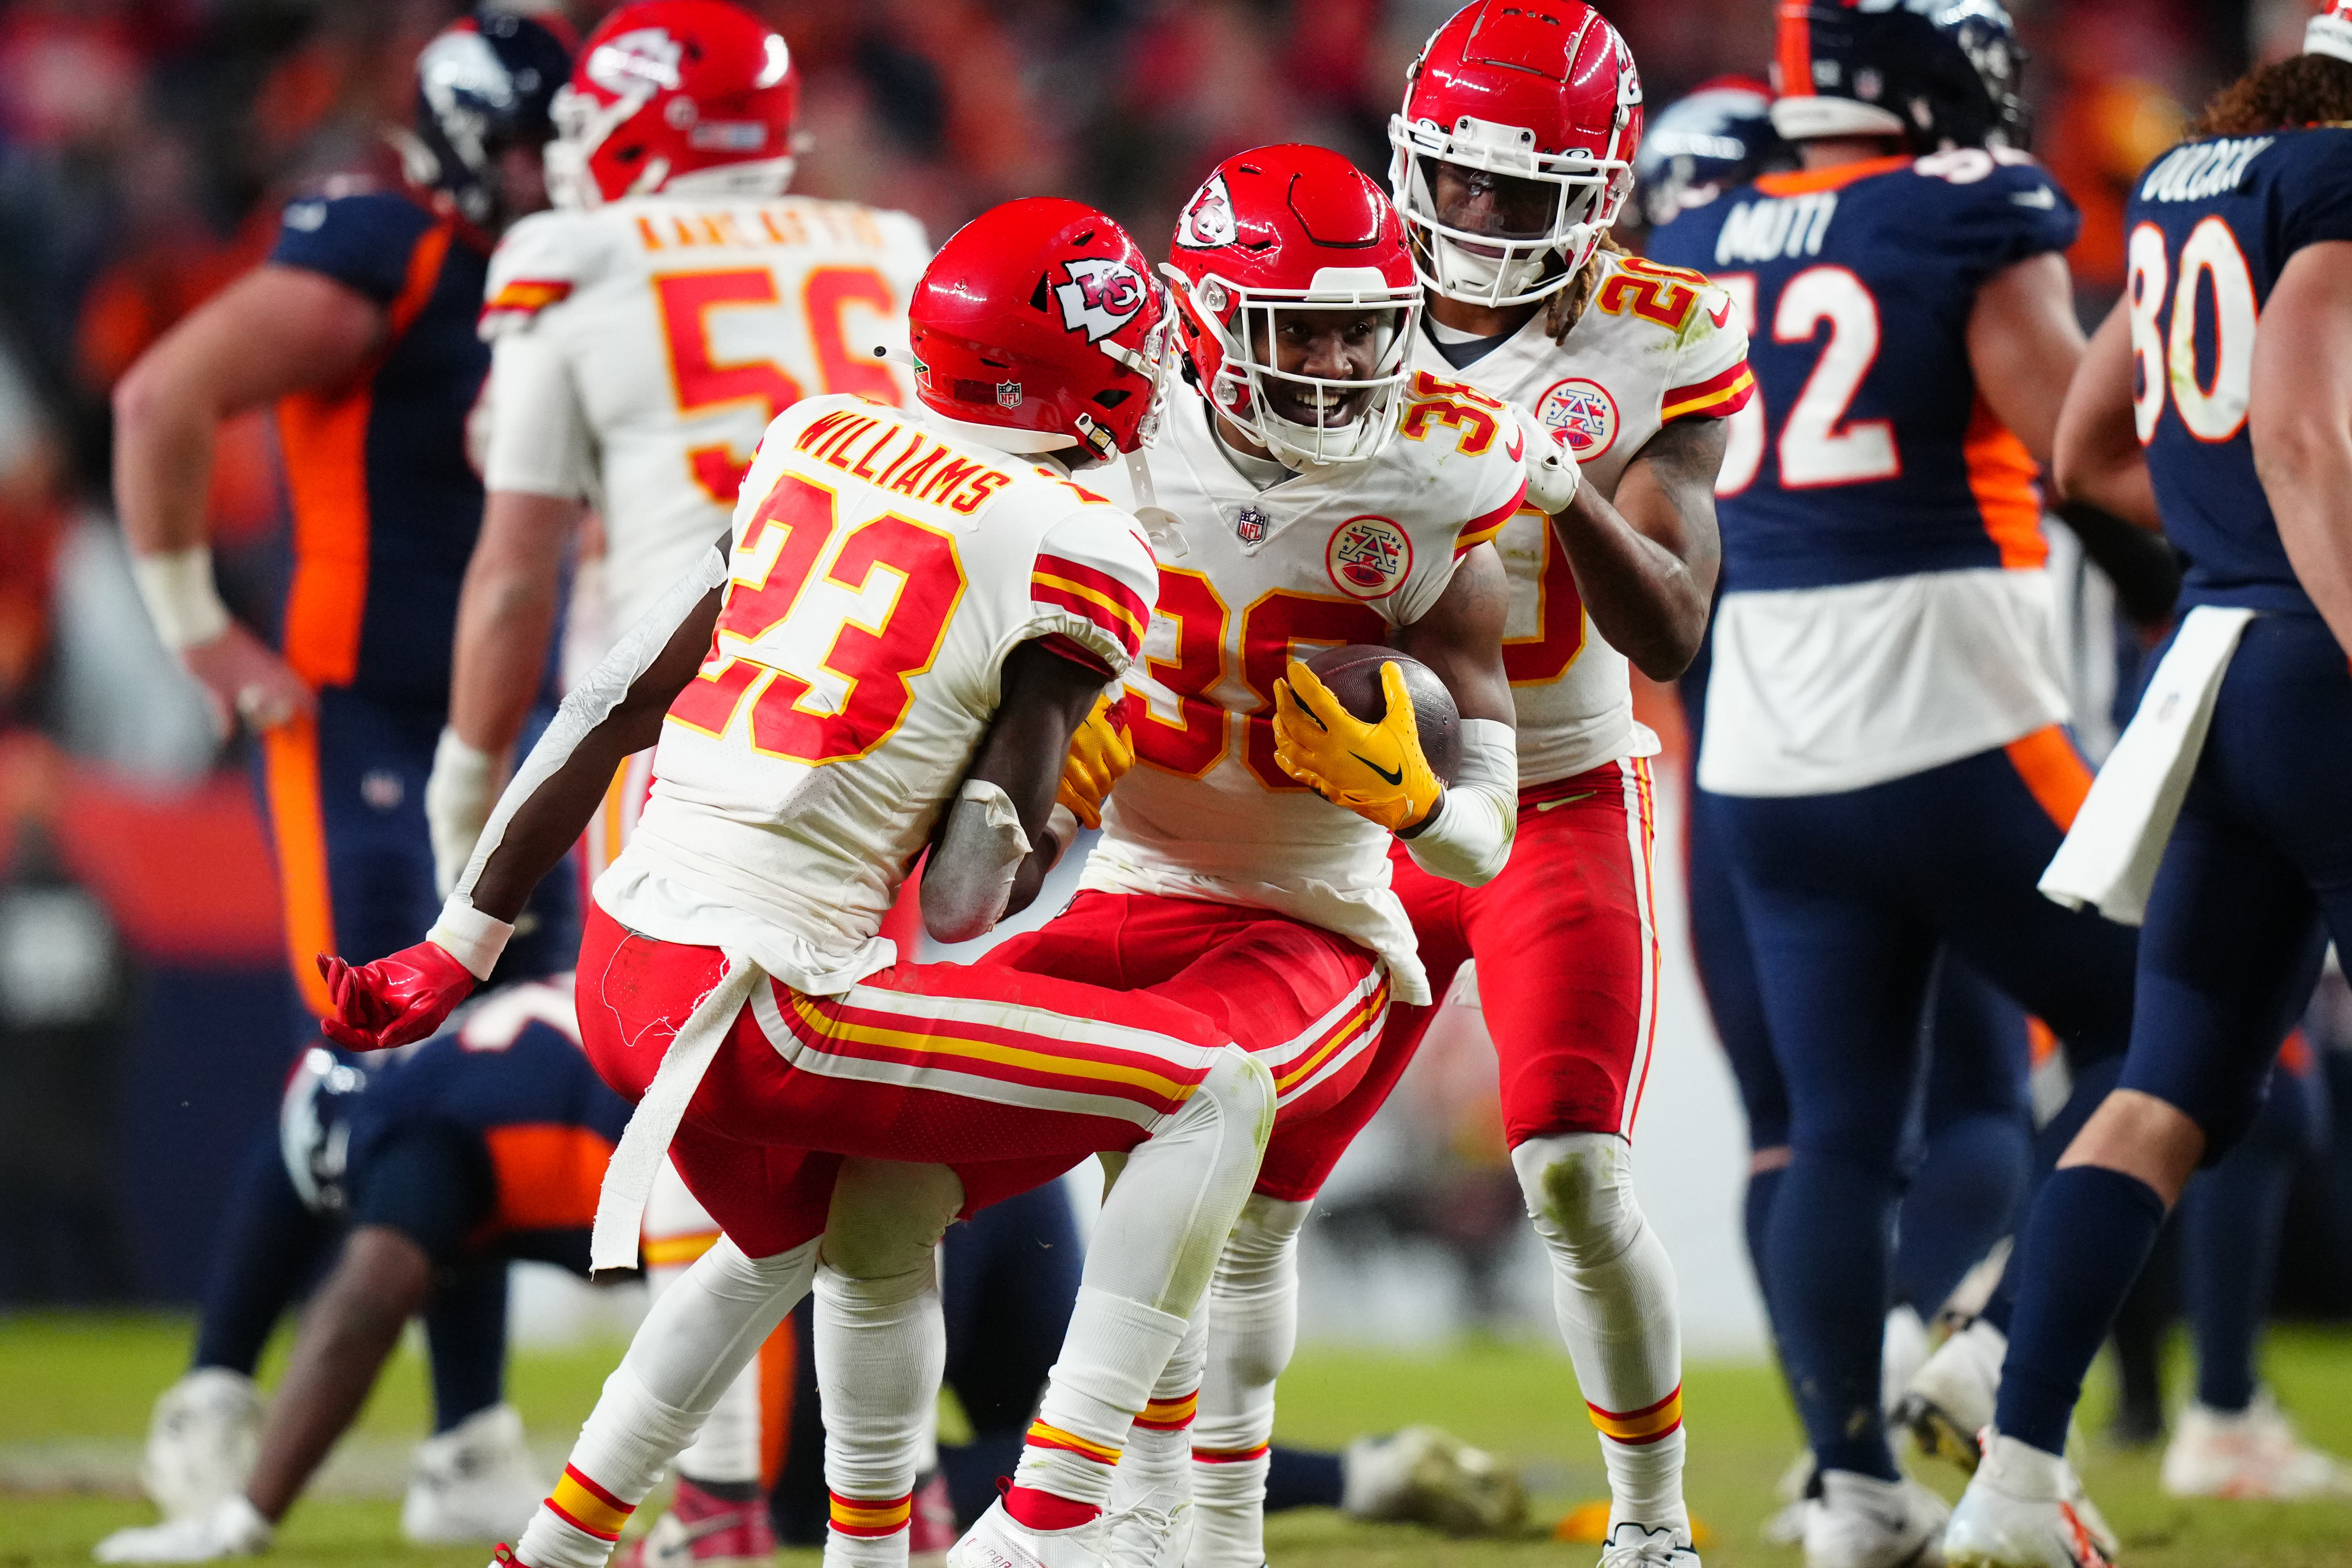 Dec 11, 2022; Denver, Colorado, USA; Kansas City Chiefs cornerback L'Jarius Sneed (38) celebrates his interception with cornerback Joshua Williams (23) and safety Justin Reid (20) n the fourth quarter against the Denver Broncos at Empower Field at Mile High. Mandatory Credit: Ron Chenoy-USA TODAY Sports